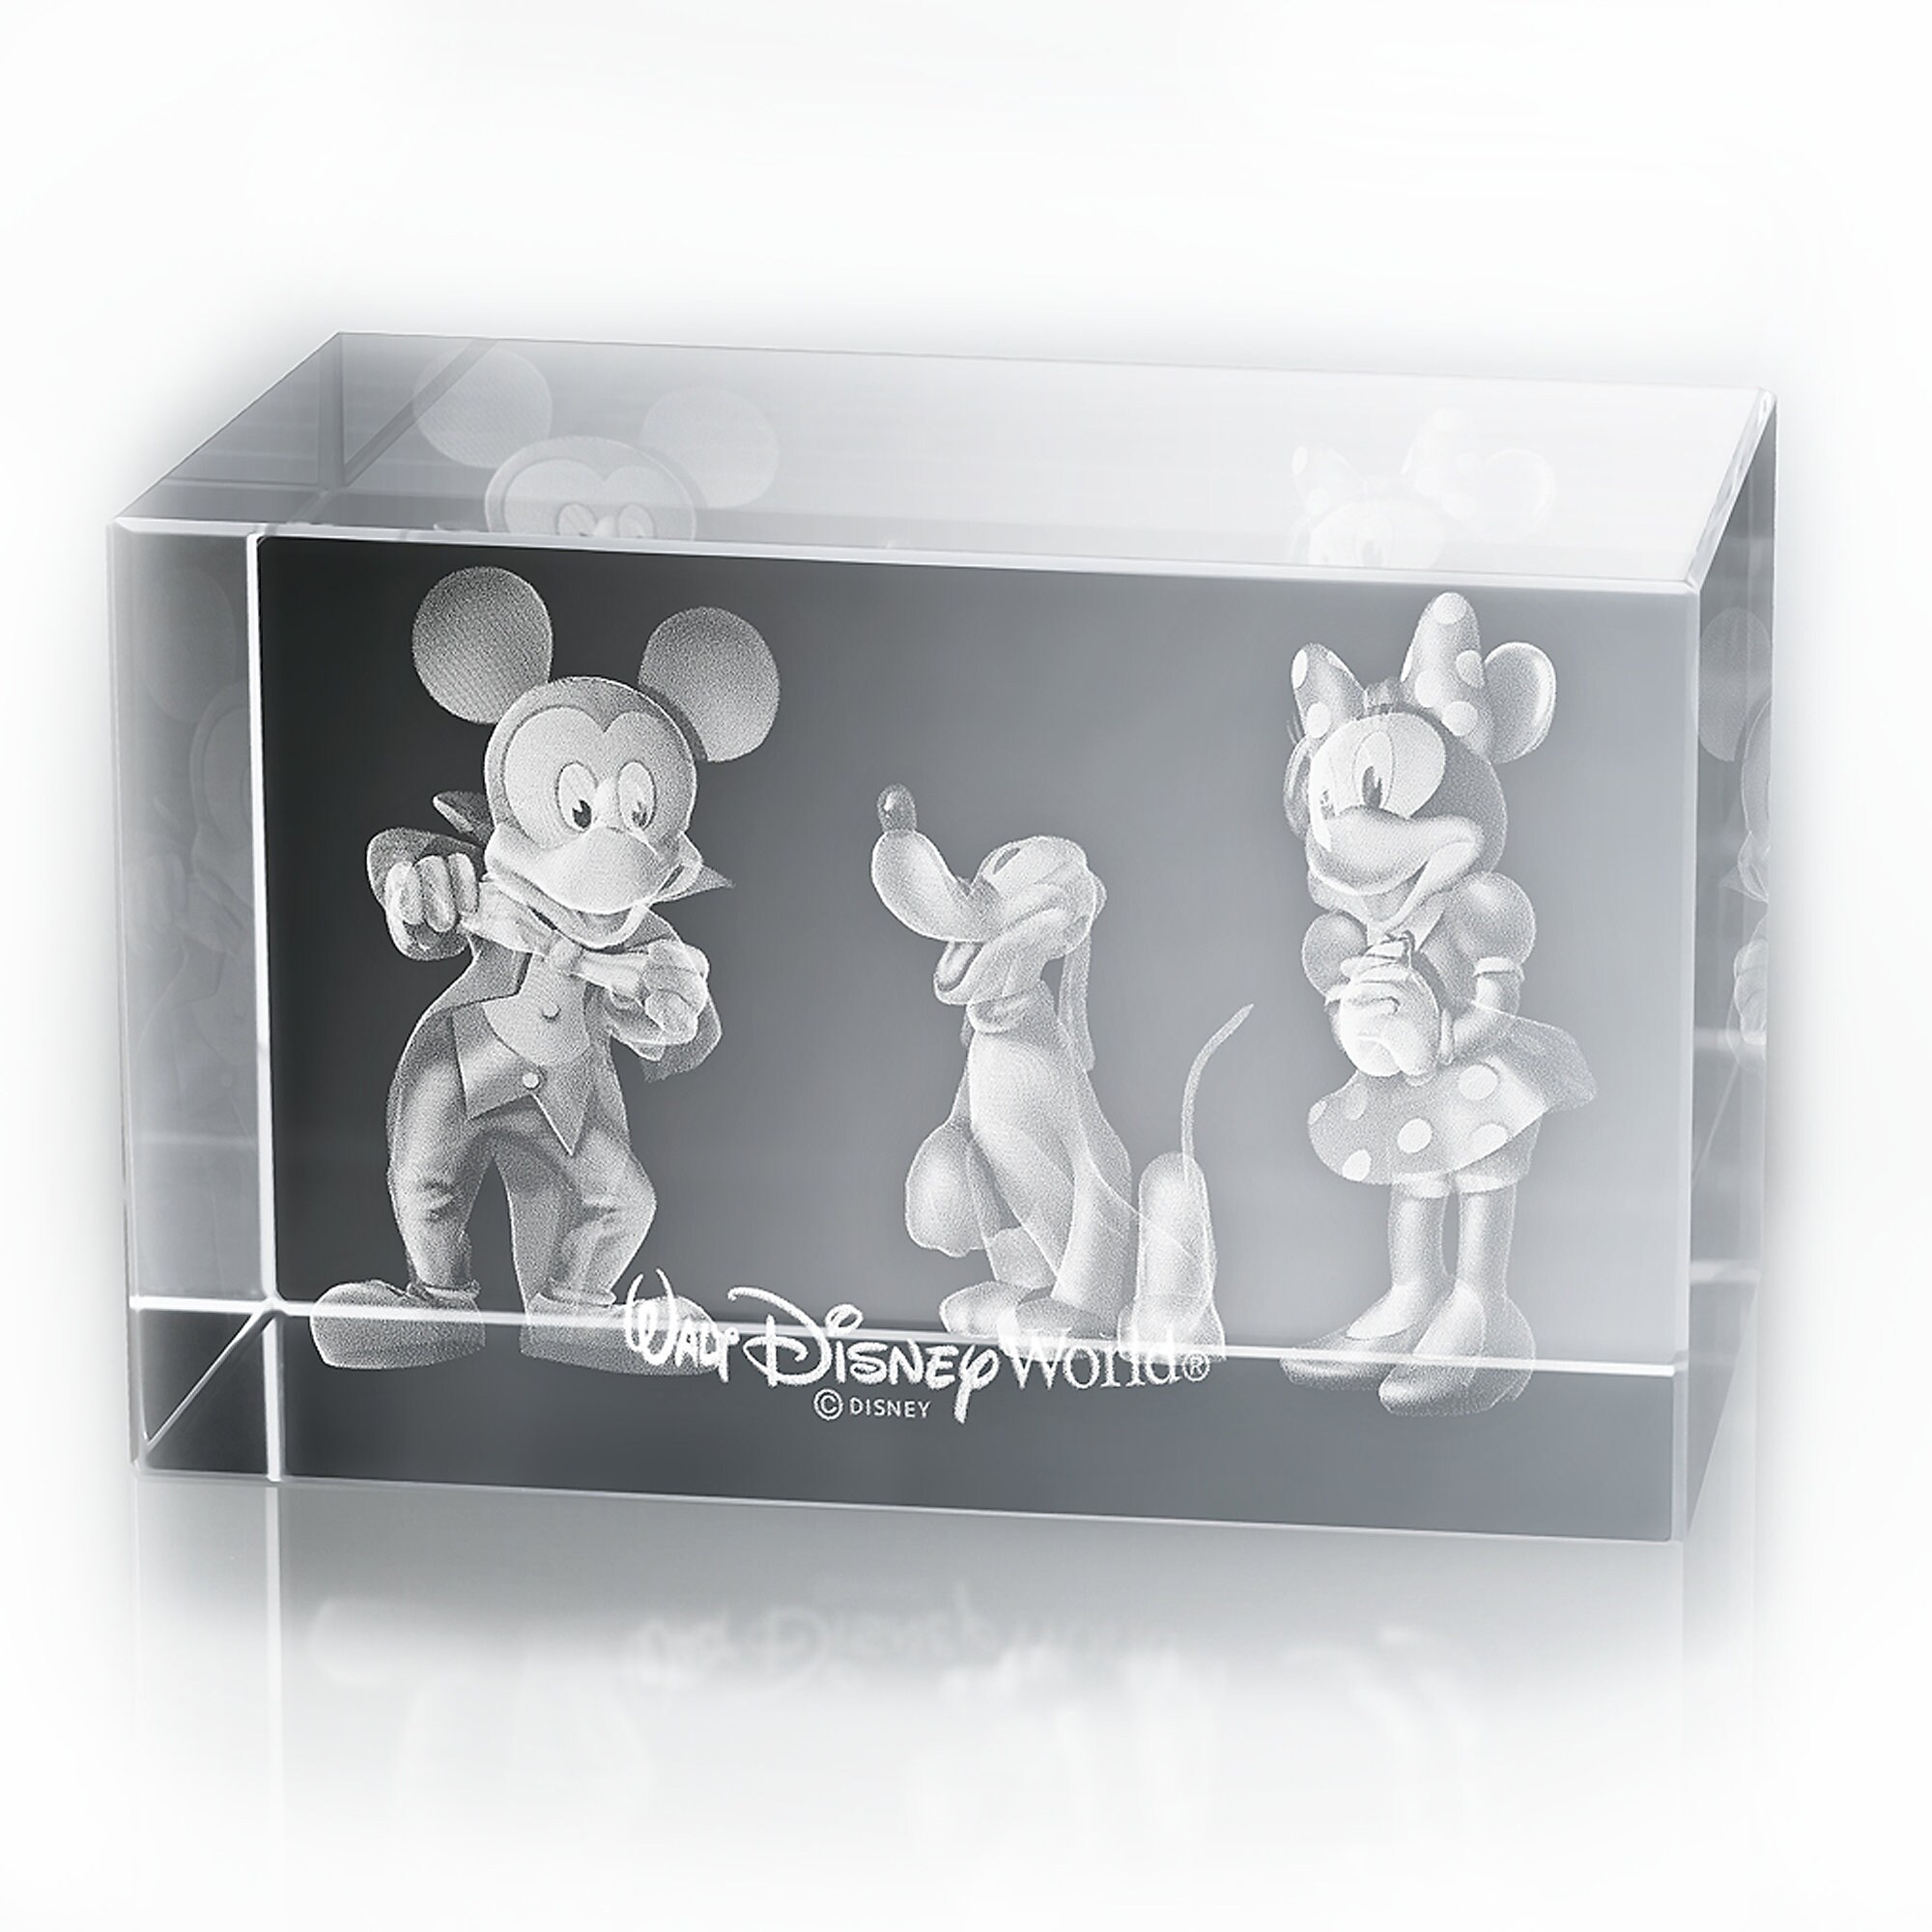 Mickey and Minnie Mouse, and Pluto Laser Cube by Arribas - Walt Disney World